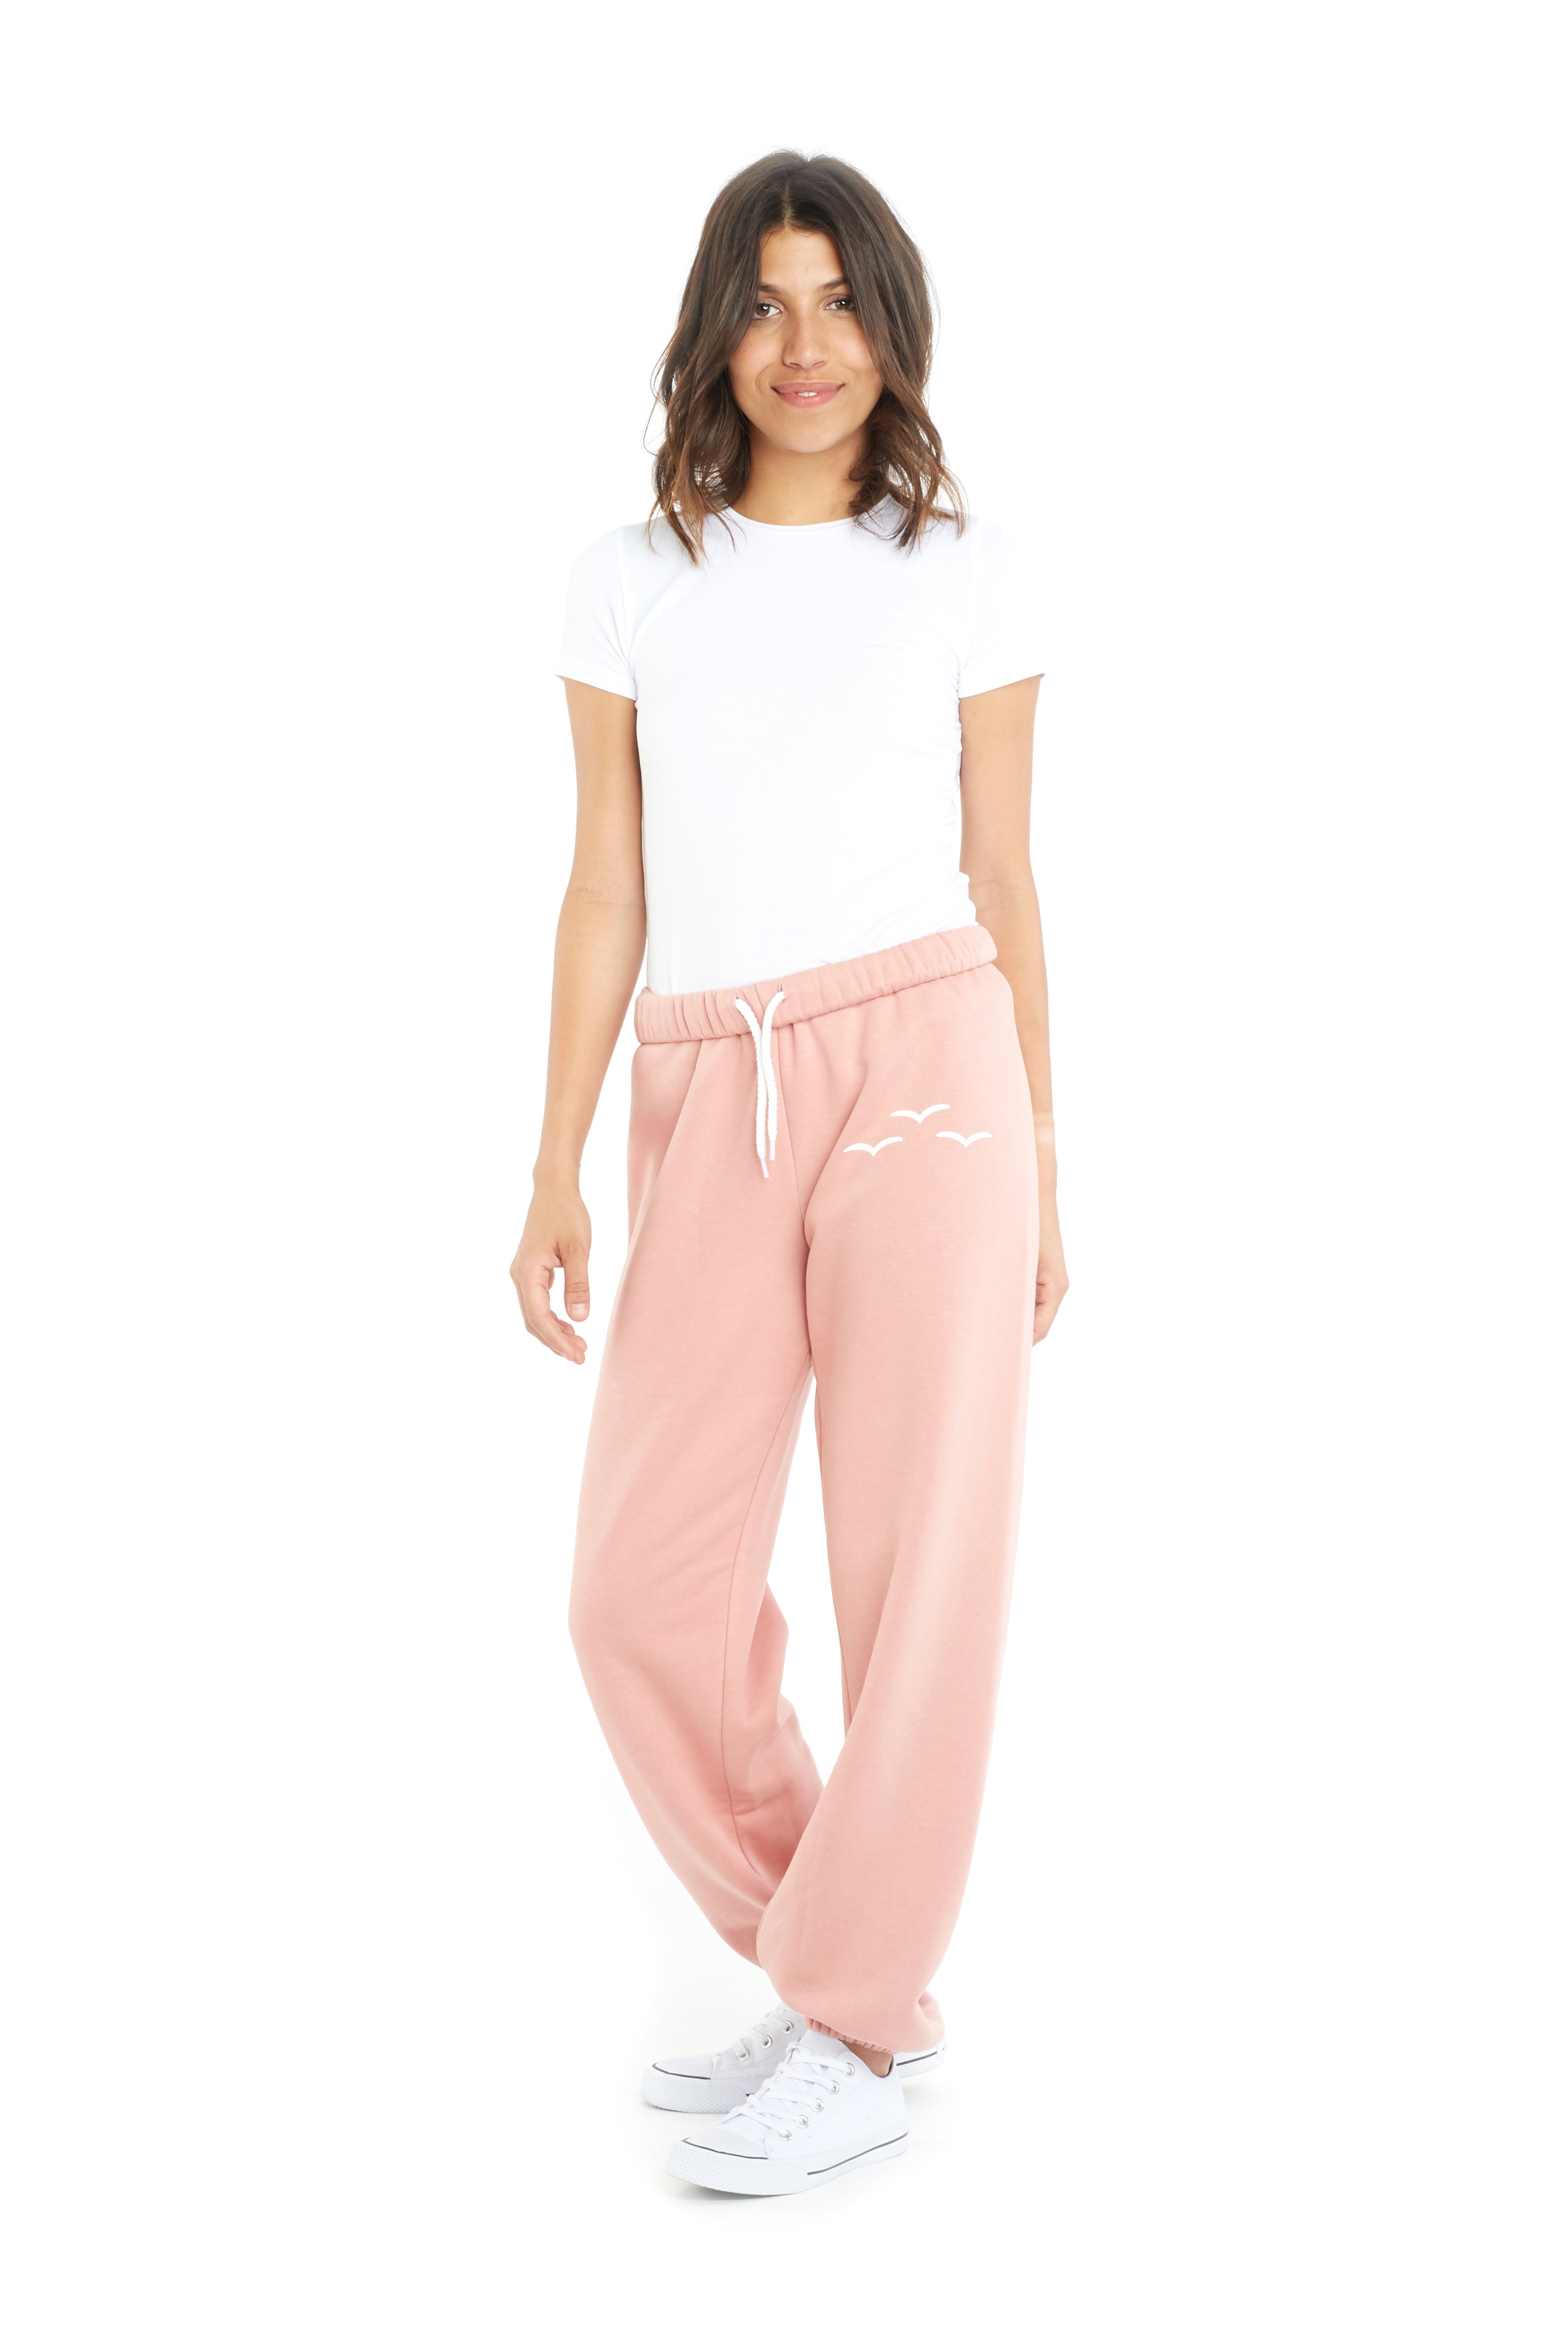 The Niki Original in blush from Lazypants - always a great buy at a reasonable price.